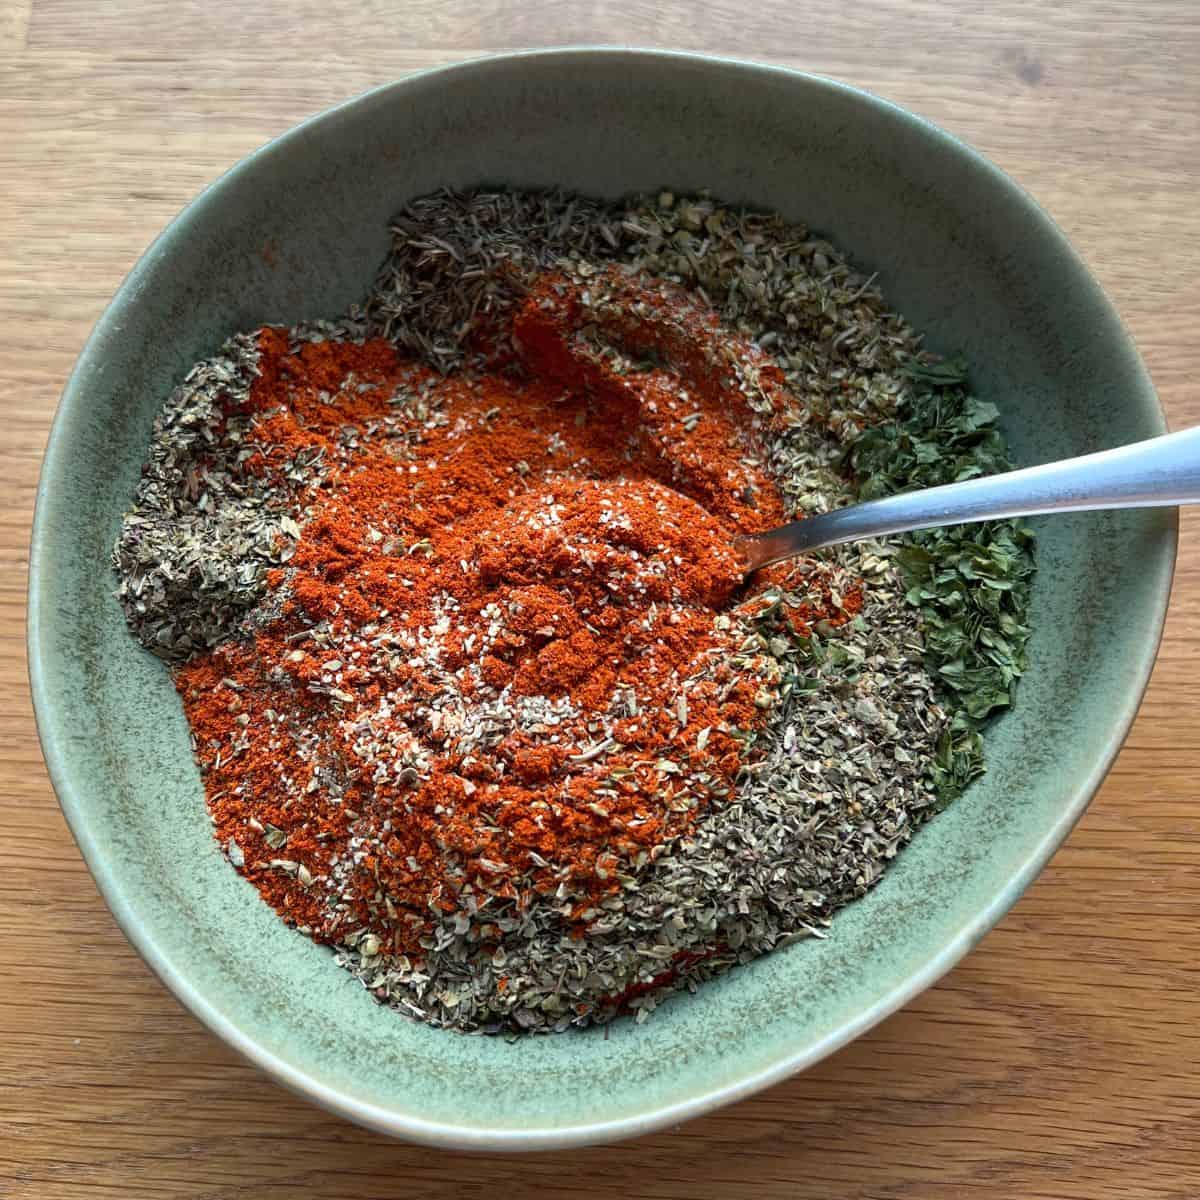 Mixing creole spices in a green bowl.